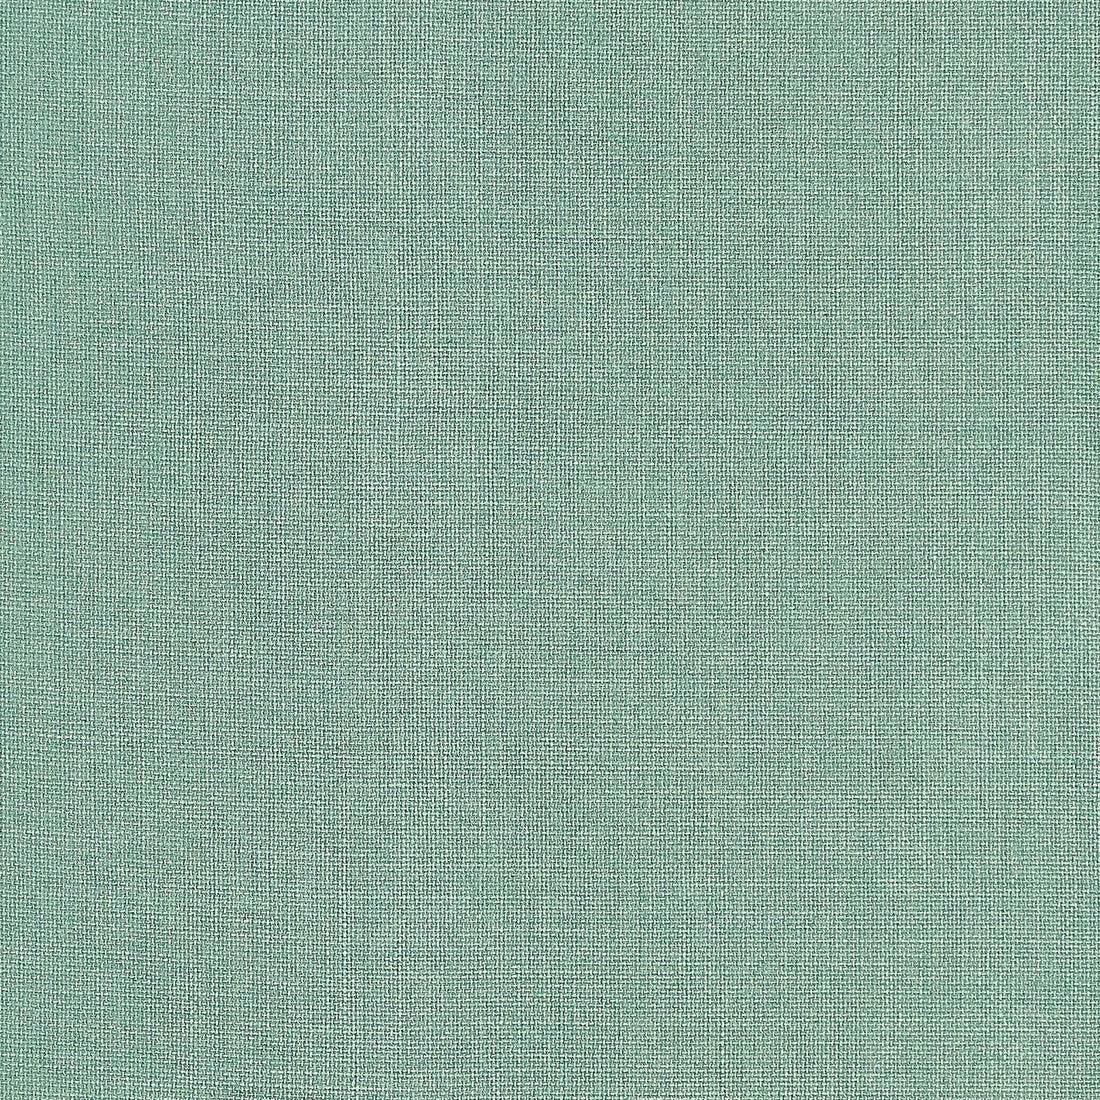 Brynn fabric in jade color - pattern number W81682 - by Thibaut in the Locale collection